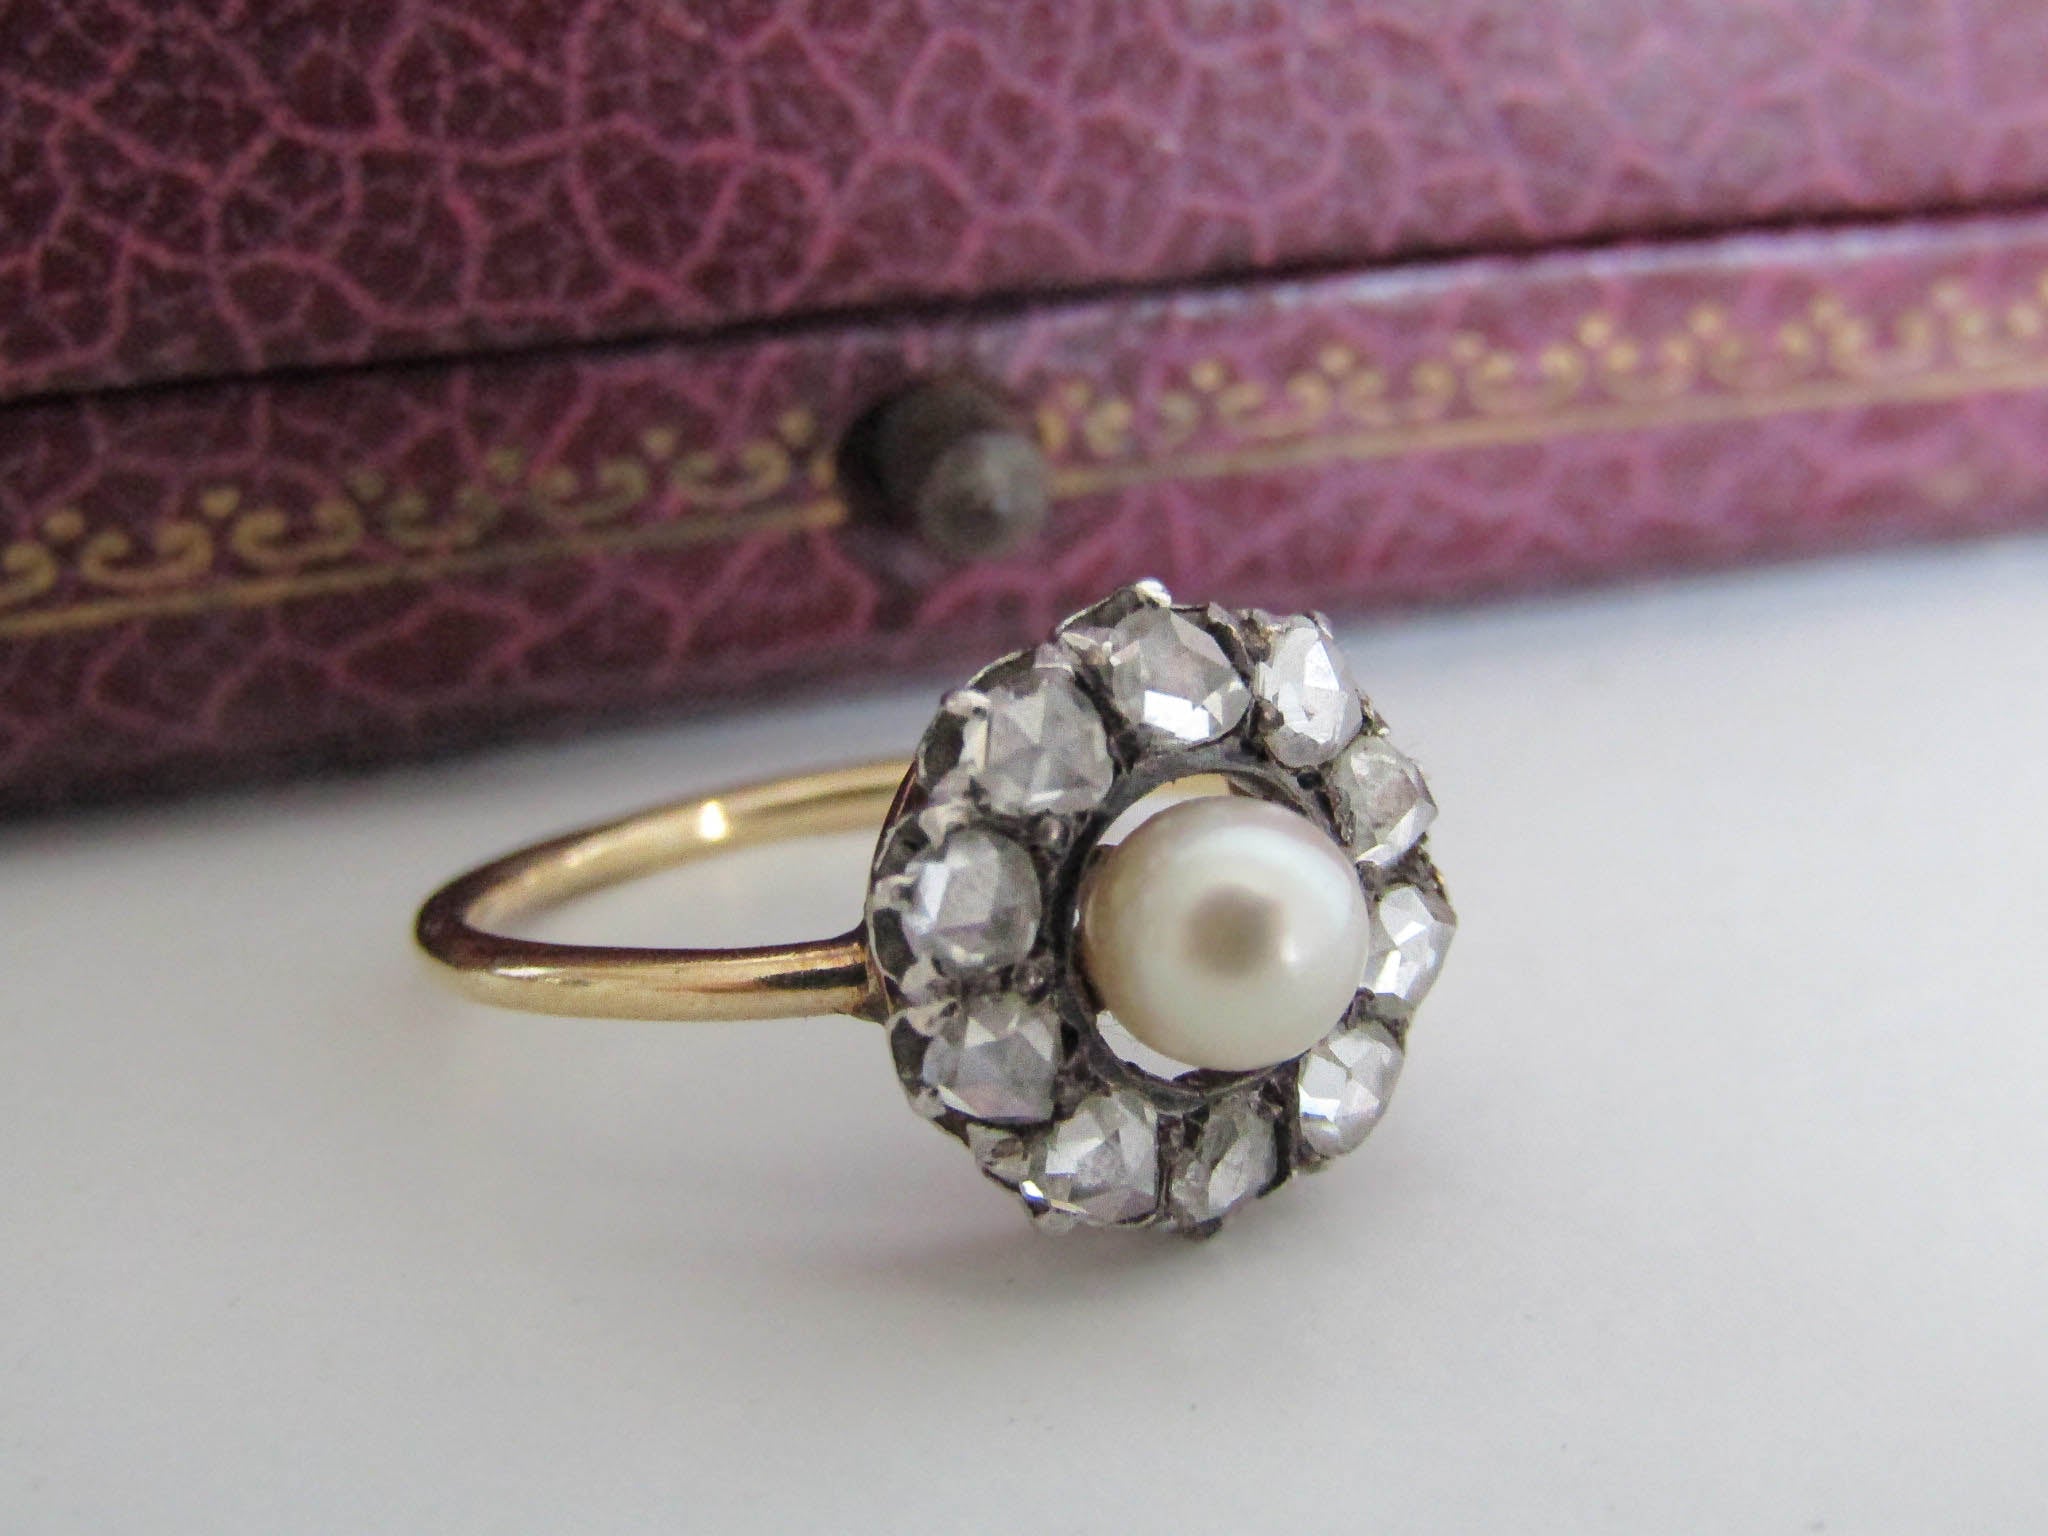 Late Victorian Era Pearl Ring w/ Rose Cut Diamond Accents 14K Yellow Gold